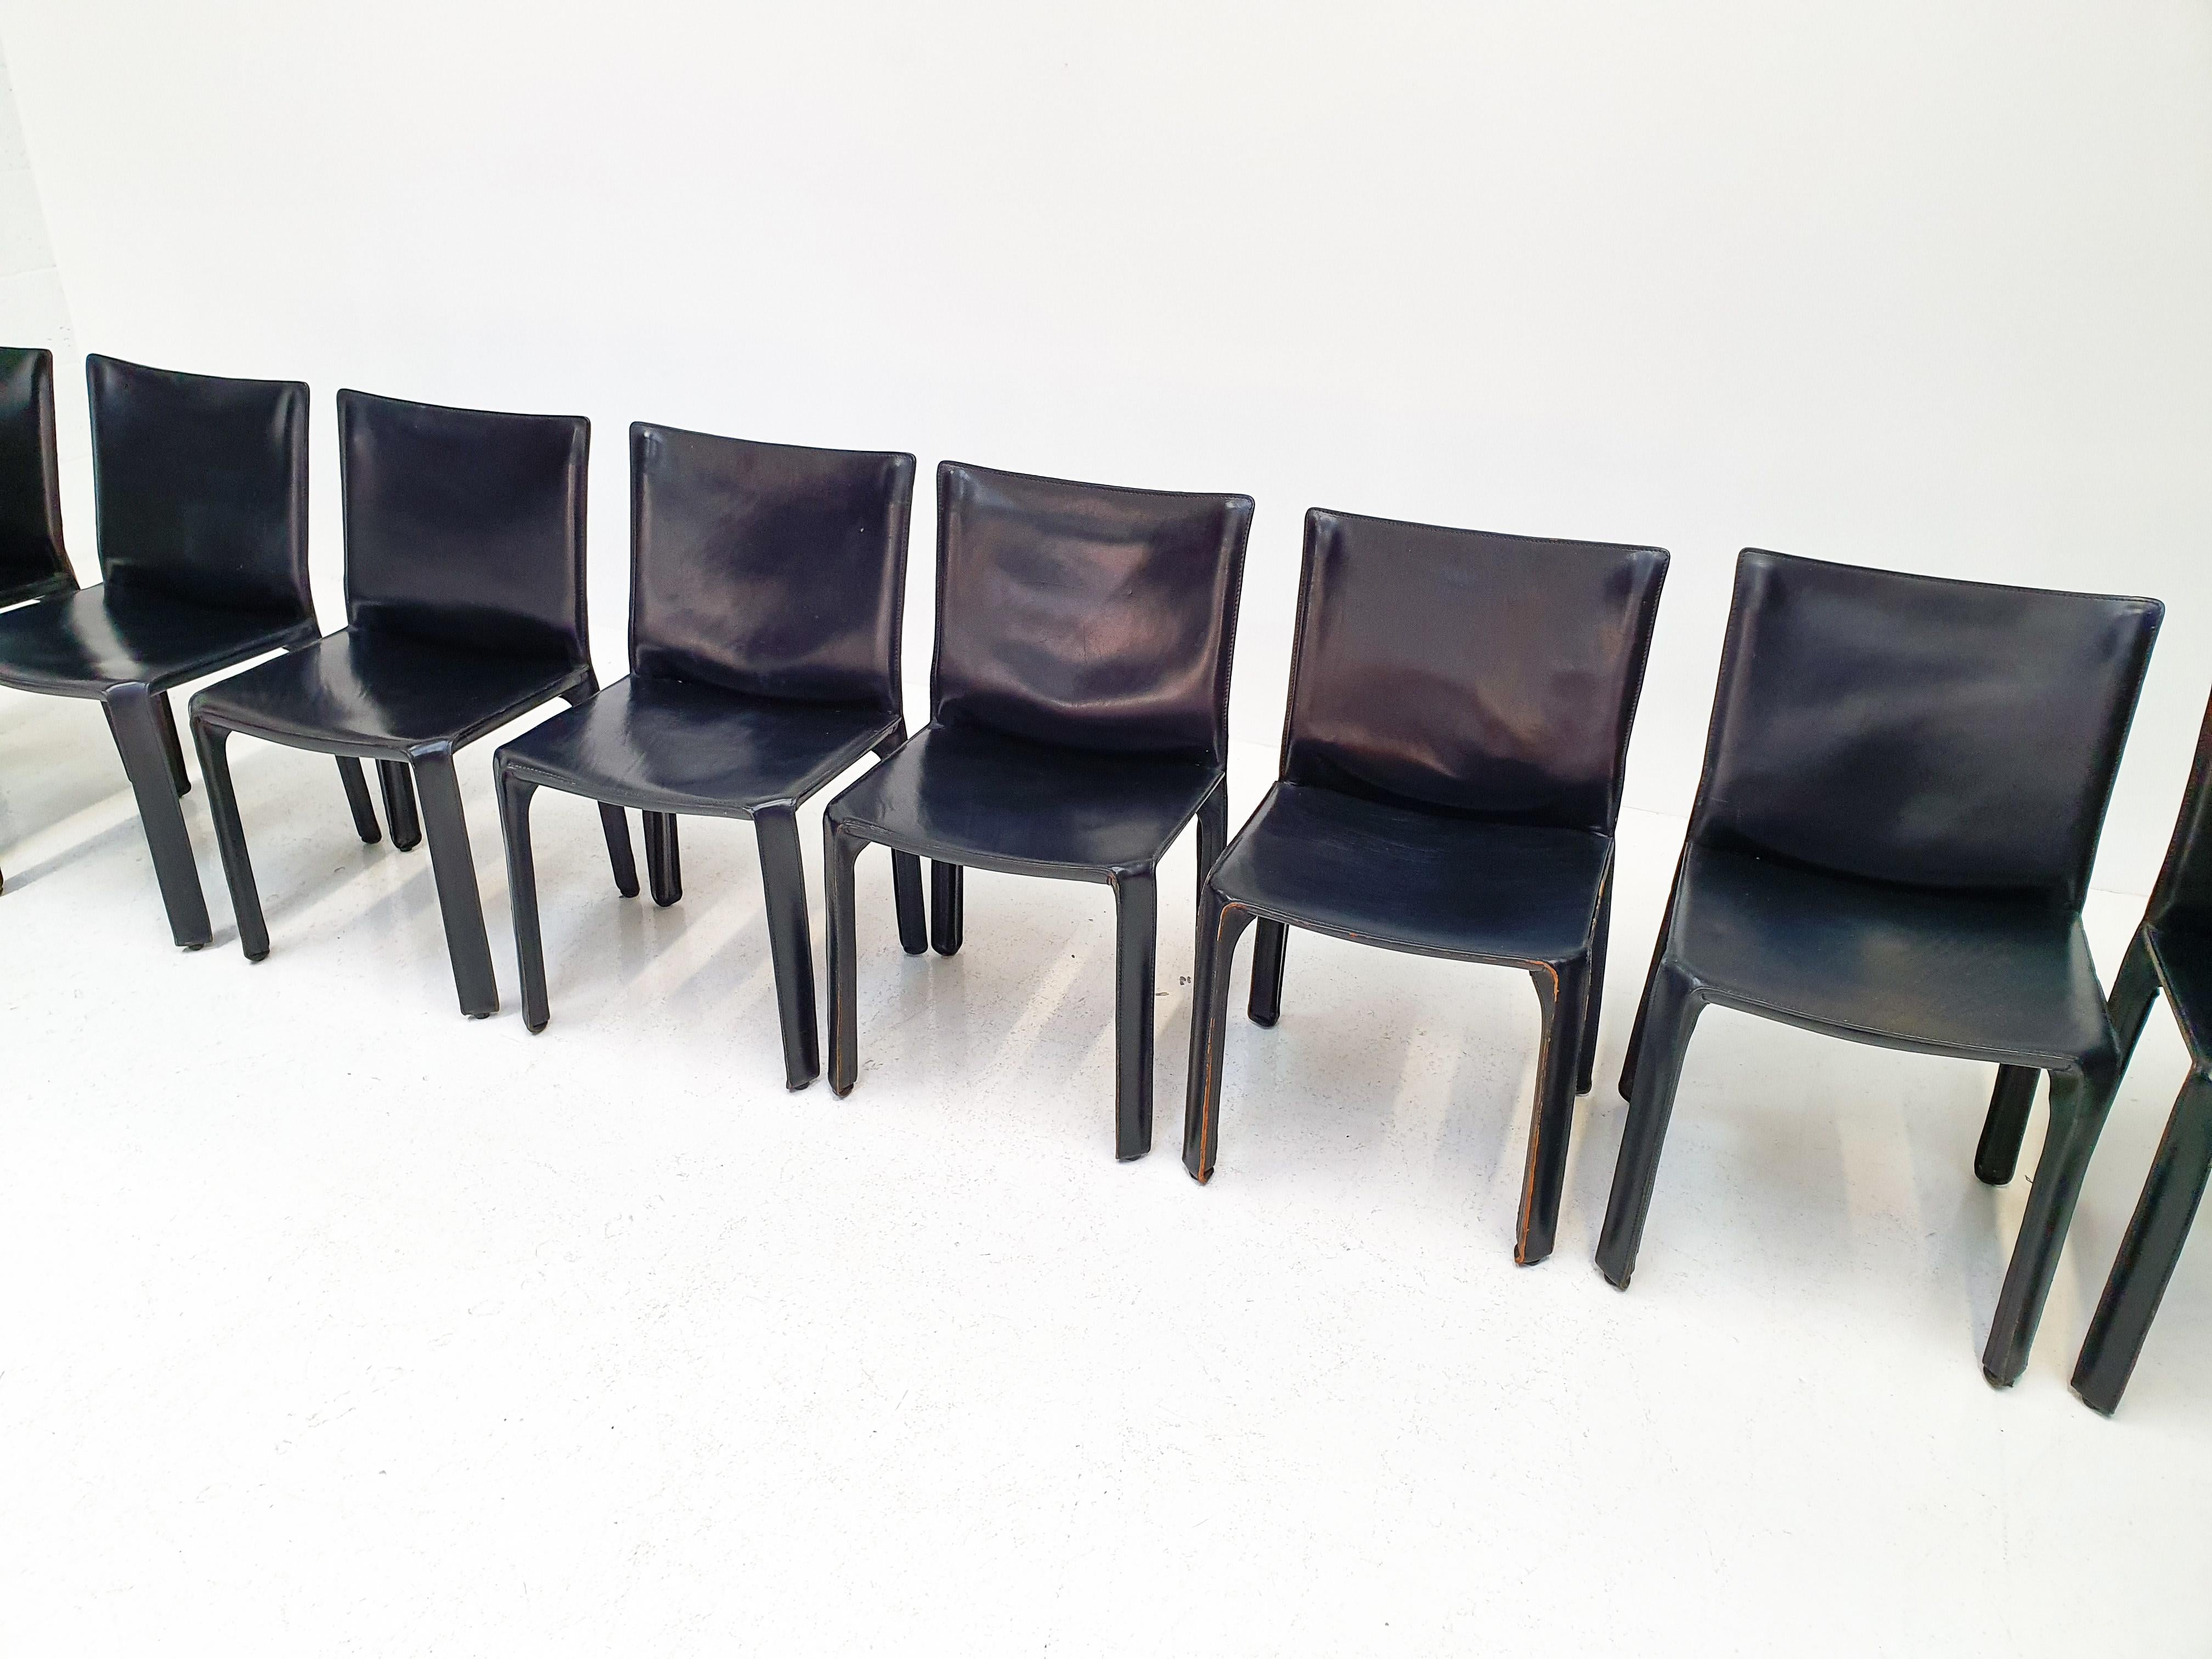 Mid-Century Modern Set of 8 Mario Bellini Leather CAB Chairs in Black for Cassina, 1977, Italy